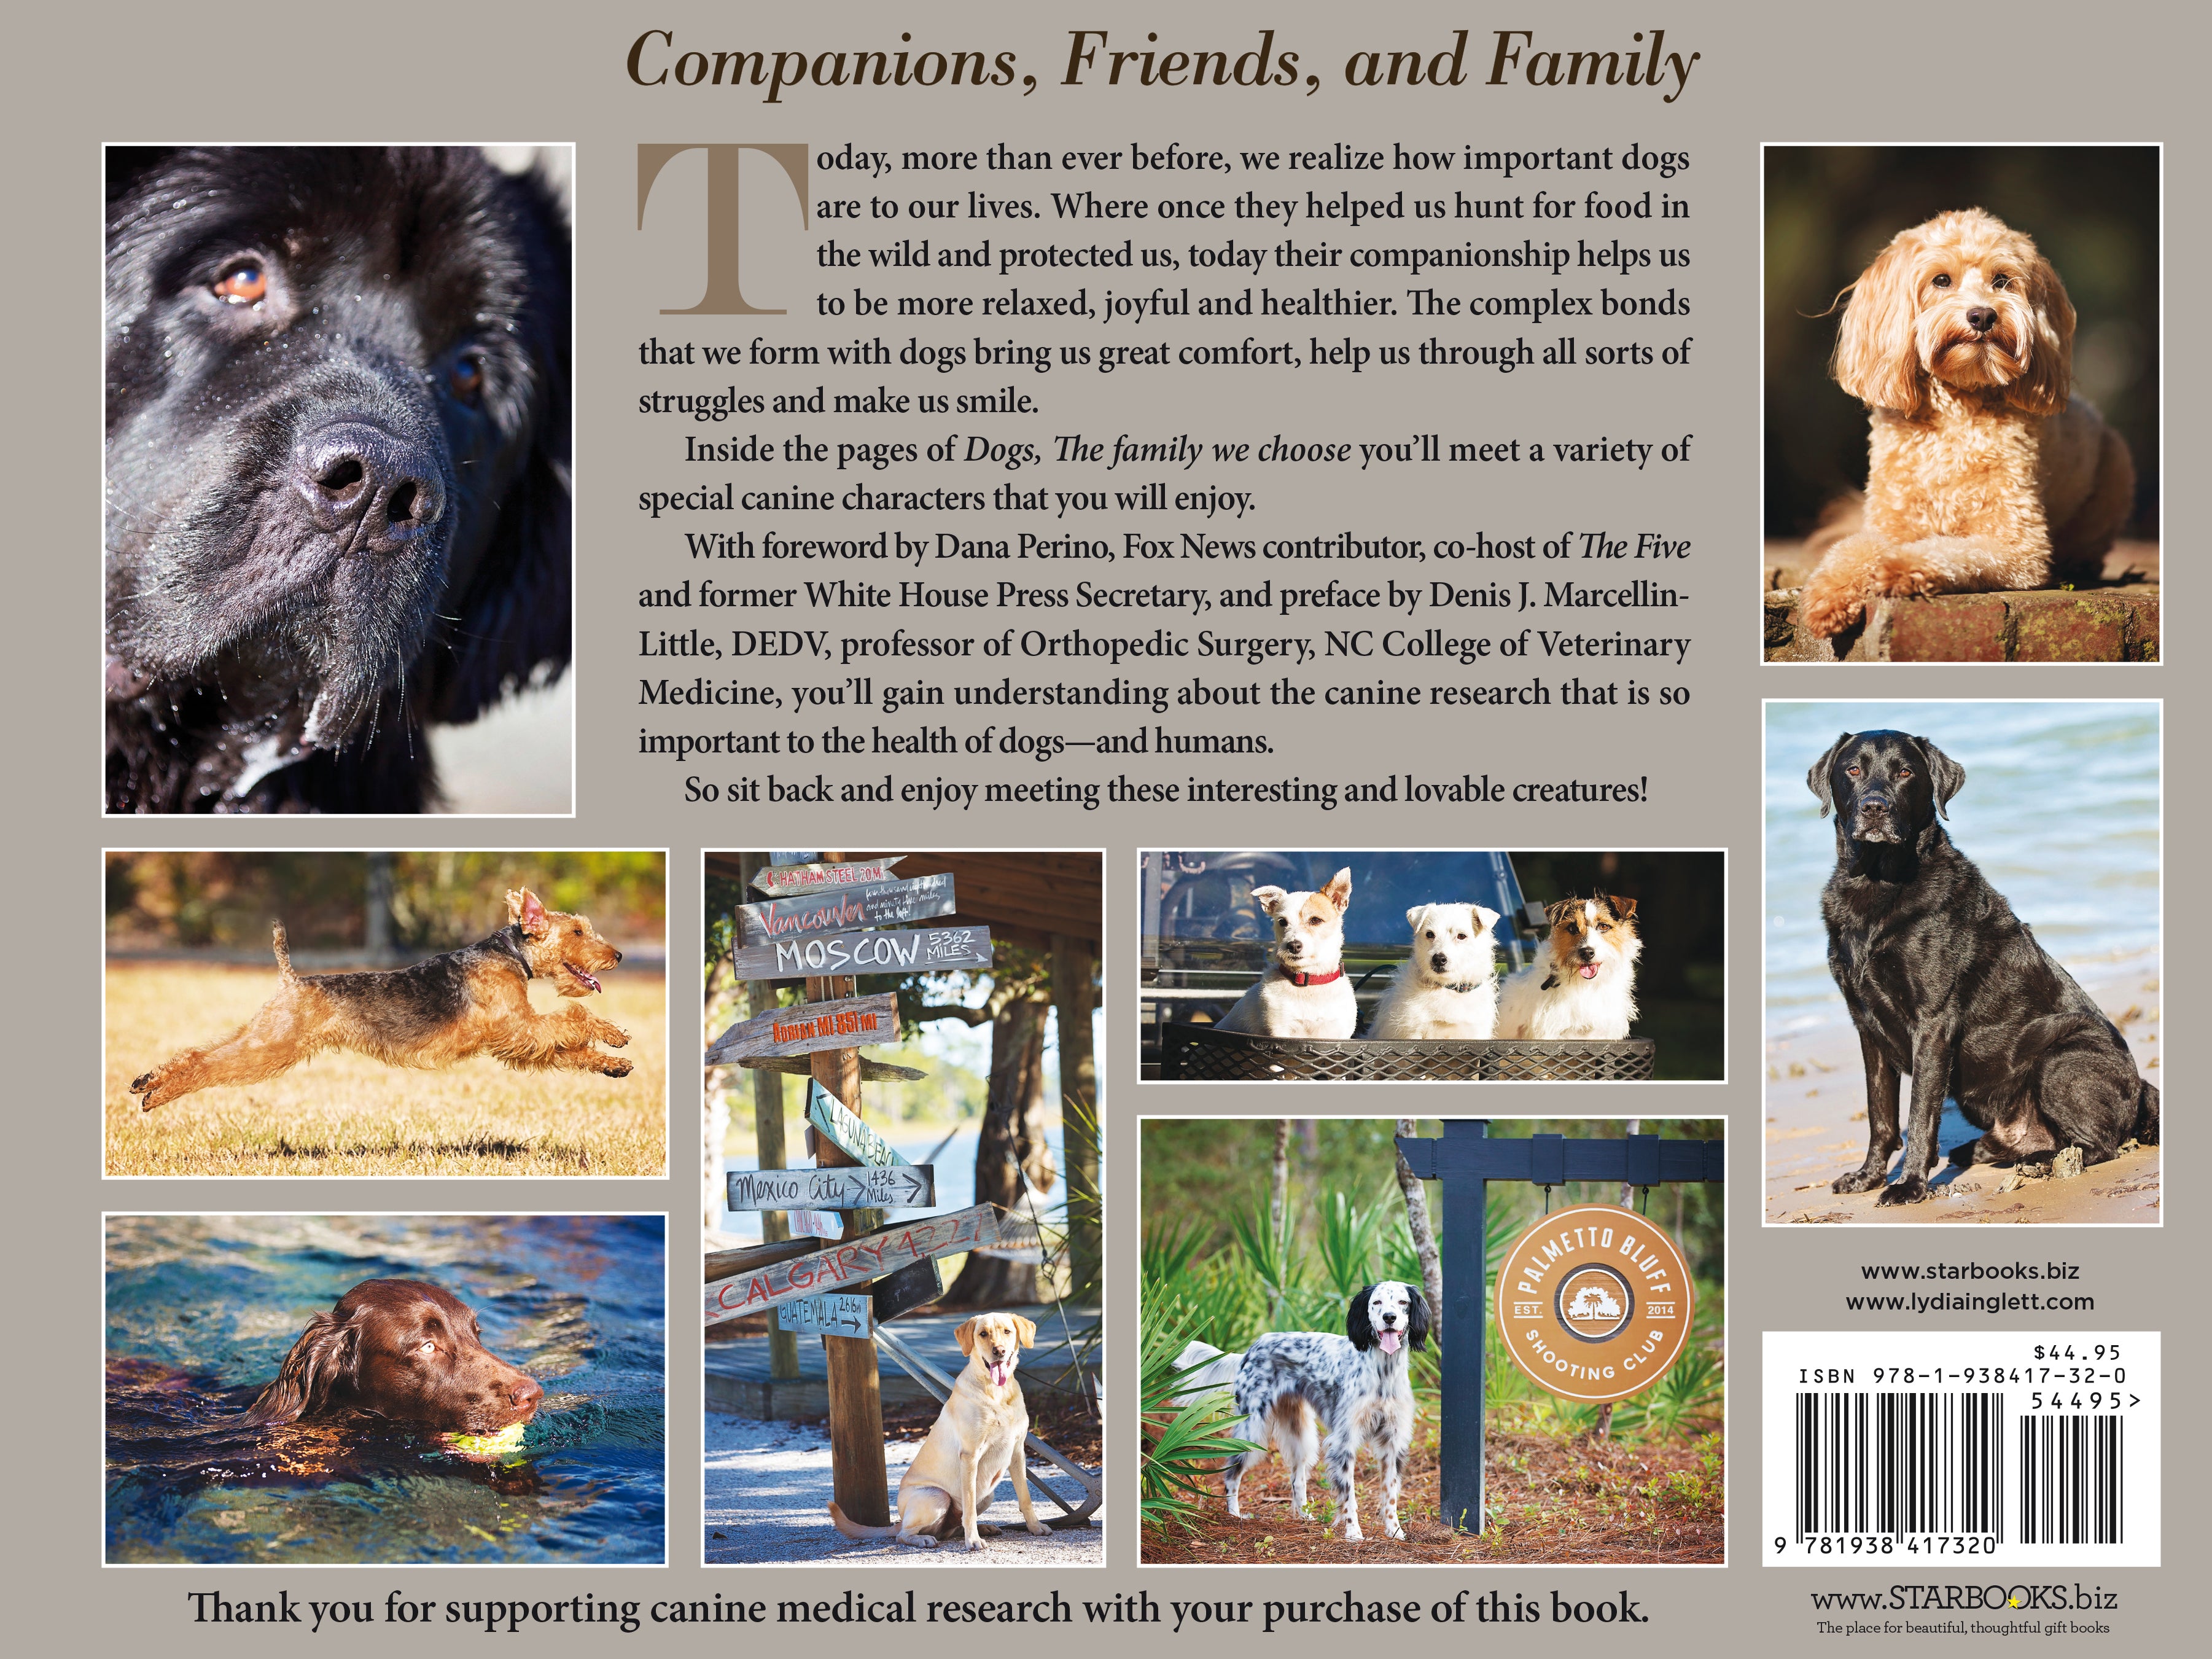 Dog Photography Book: Dogs, The Family We Choose by Melanie Steele and Starbooks